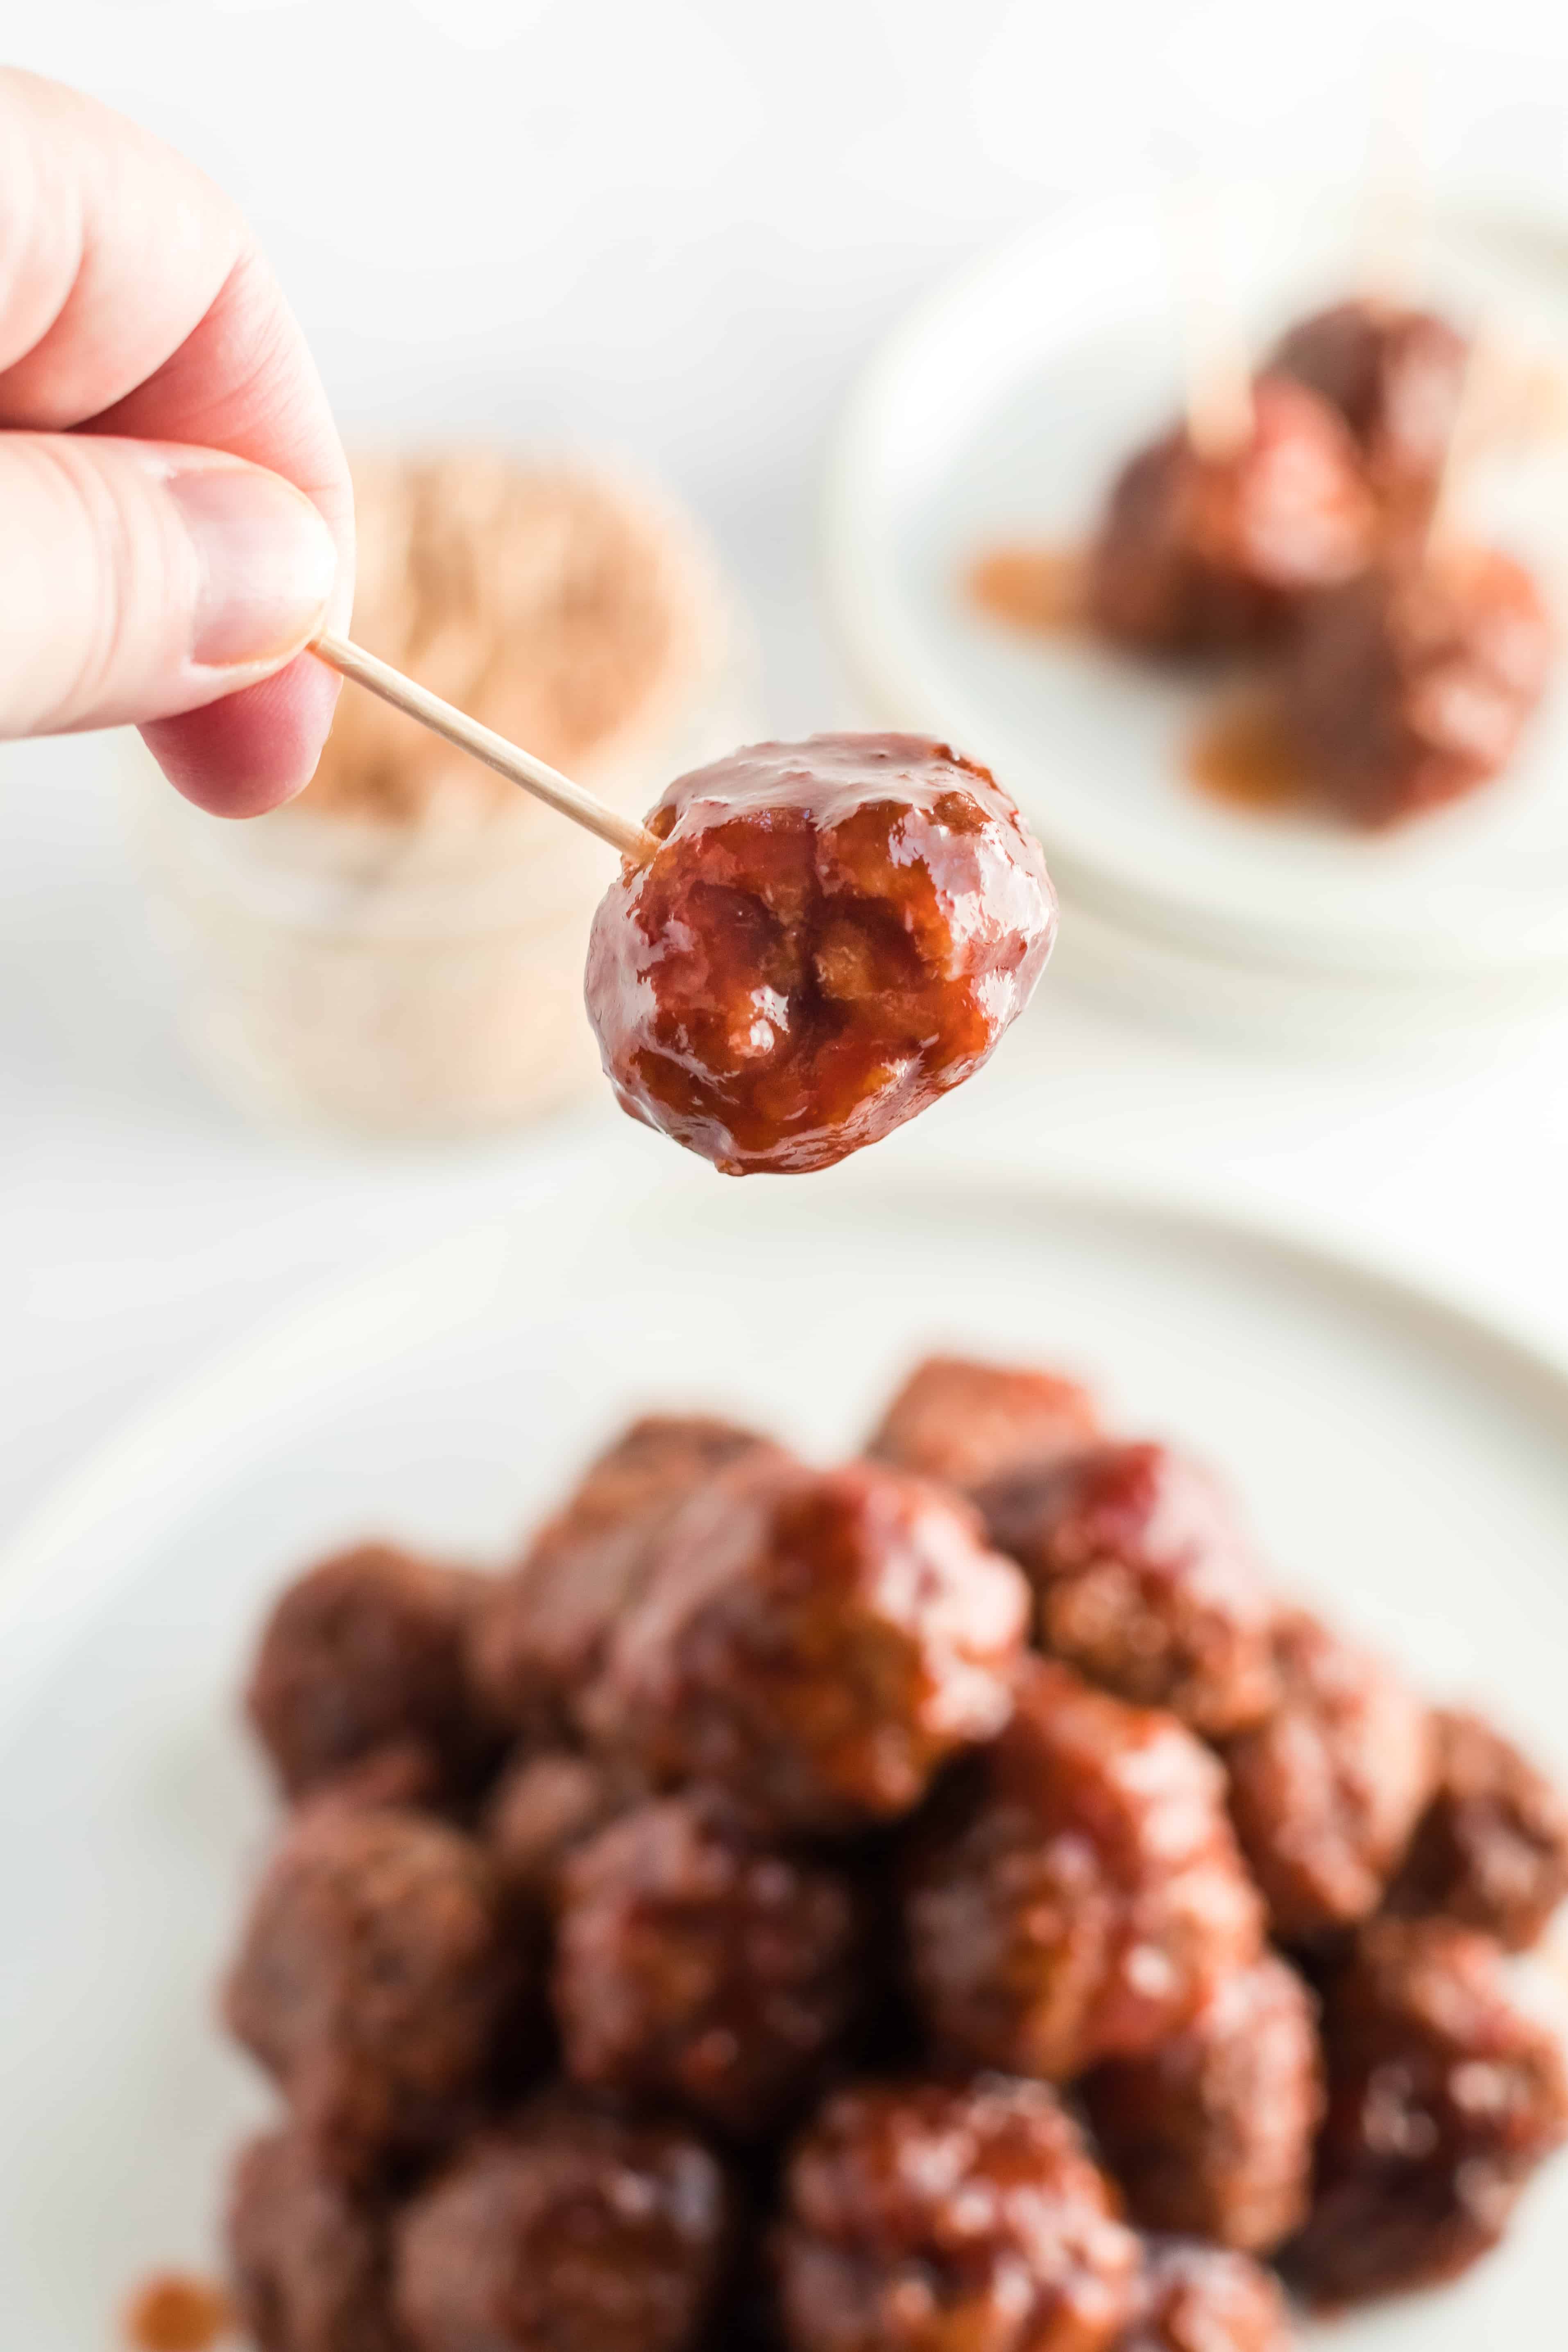 Closeup of toothpick with grape jelly meatballs. Plate of meatballs in background,